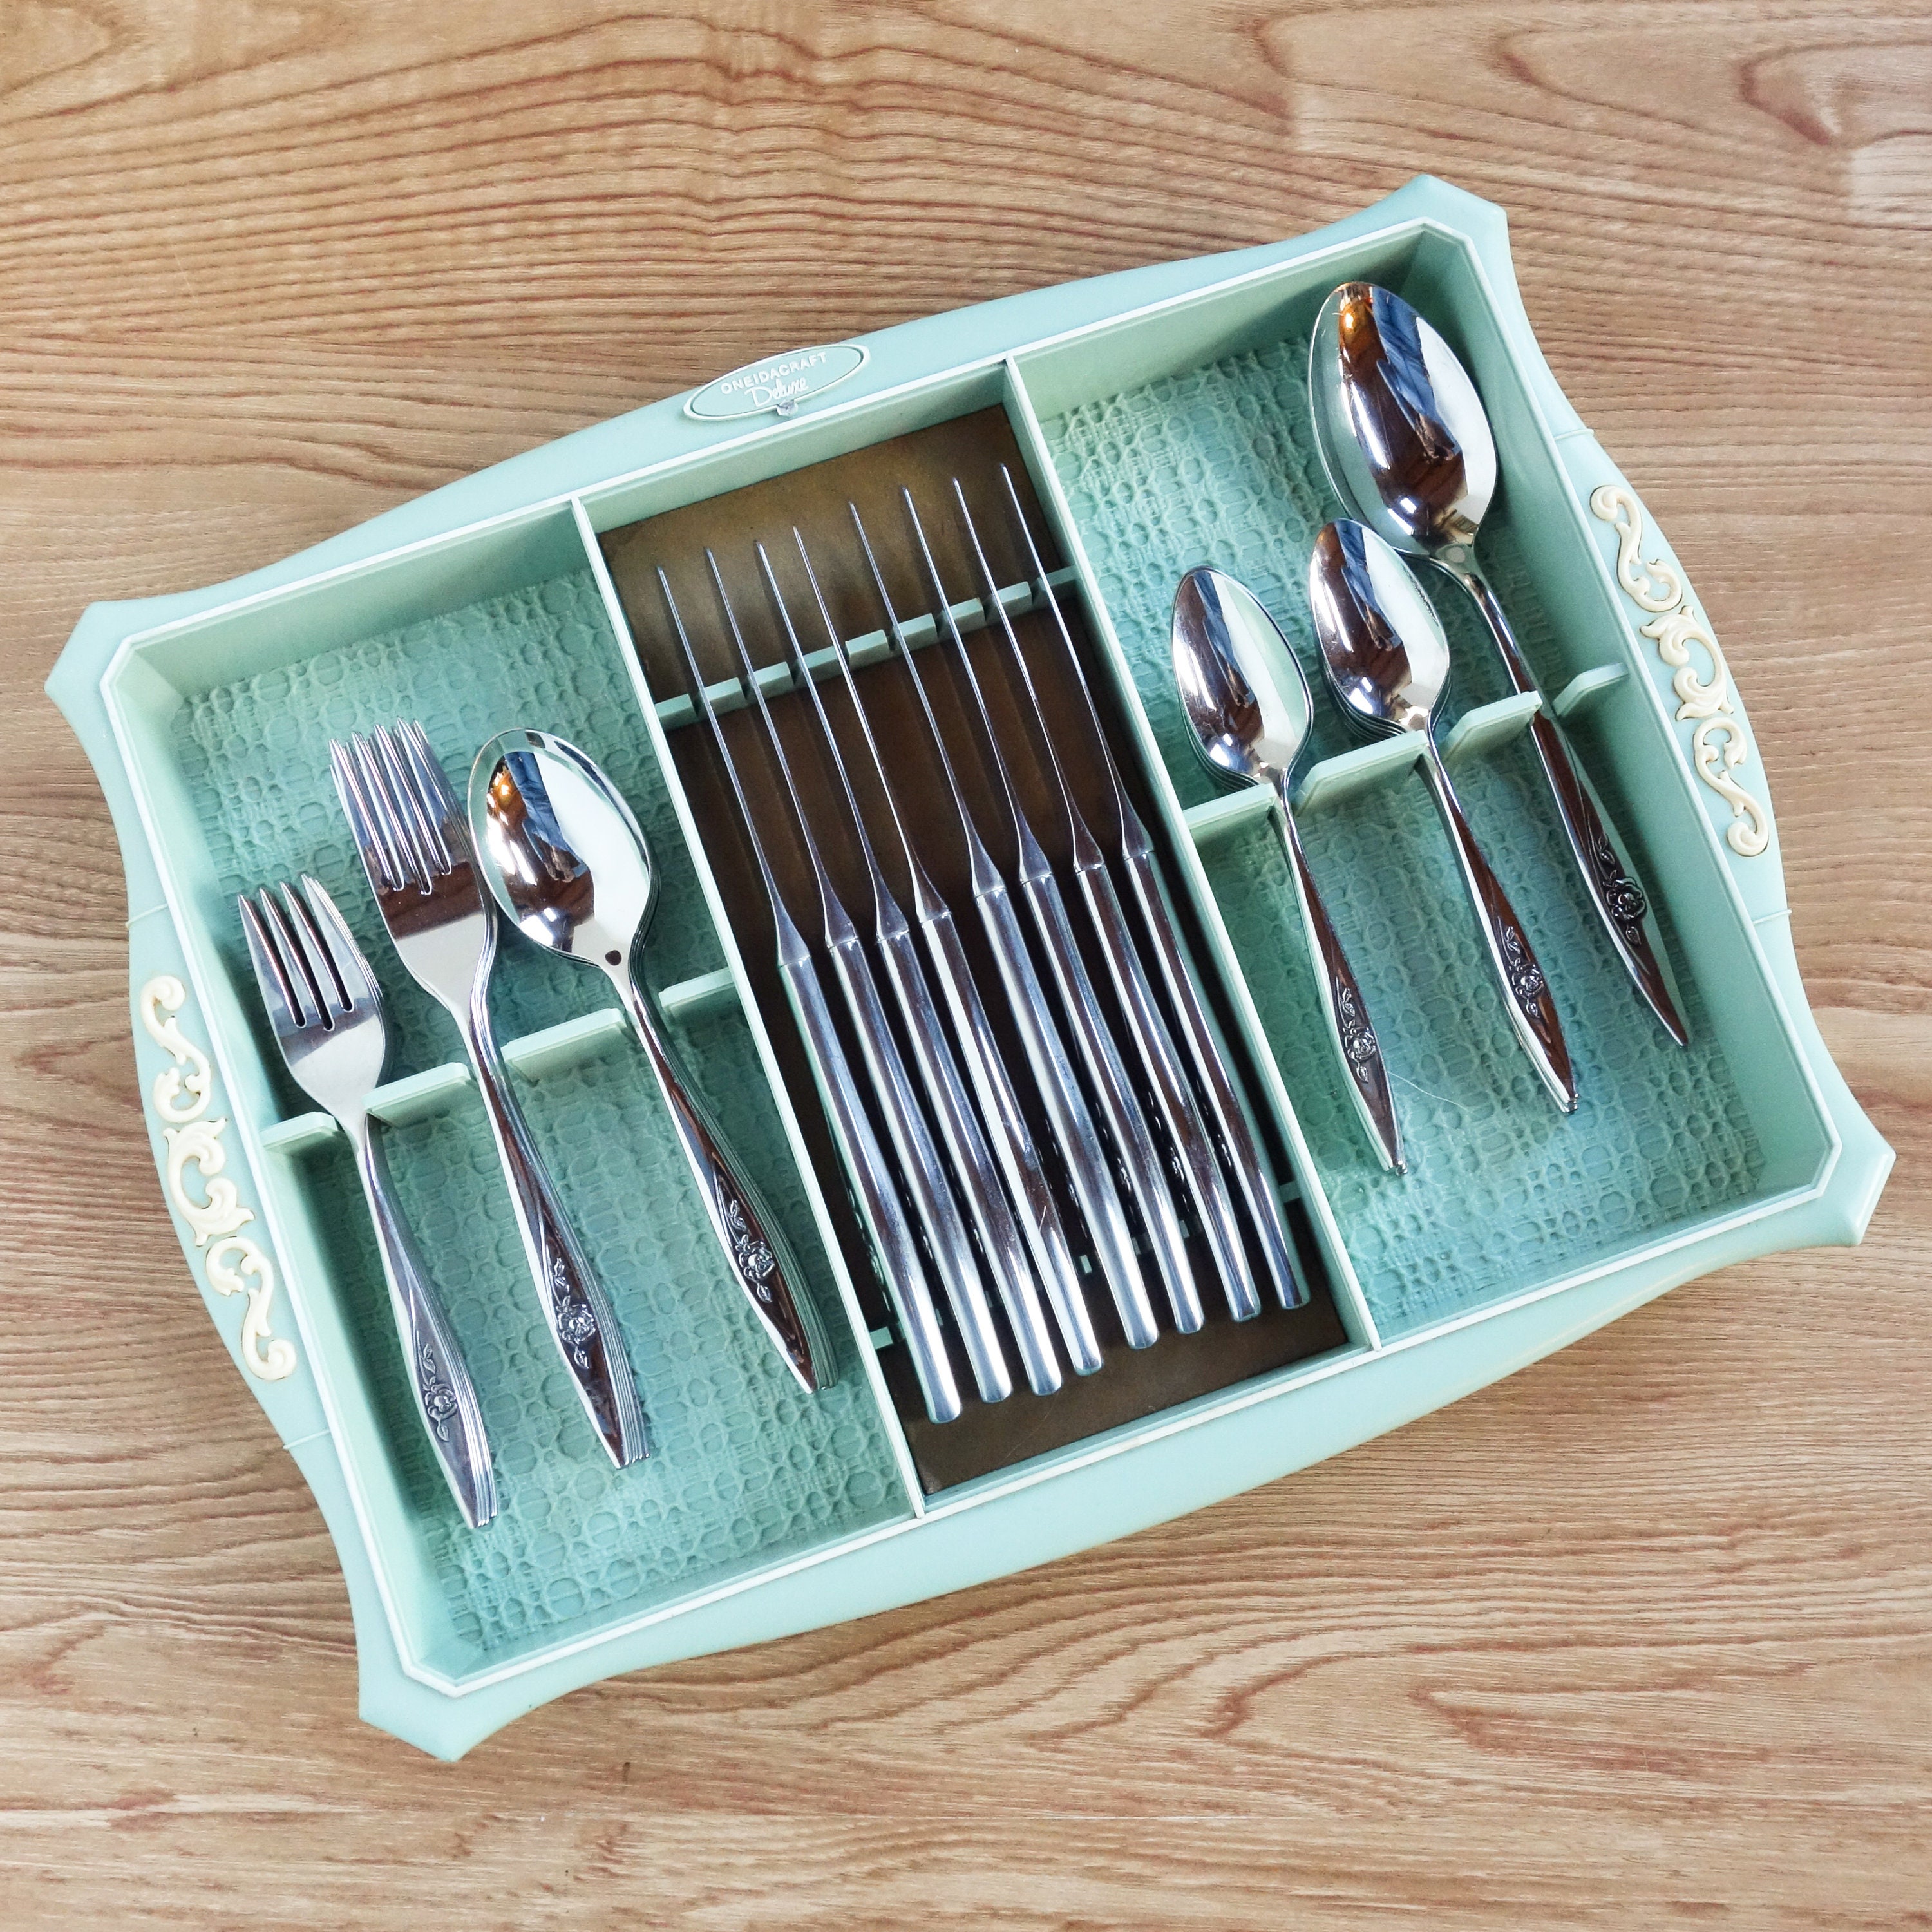 Oneida Lasting Rose Deluxe Stainless Flatware Set, Service for 8 in Storage  Tray, Vintage Silverware Set, Mint Condition, Wedding Gift 